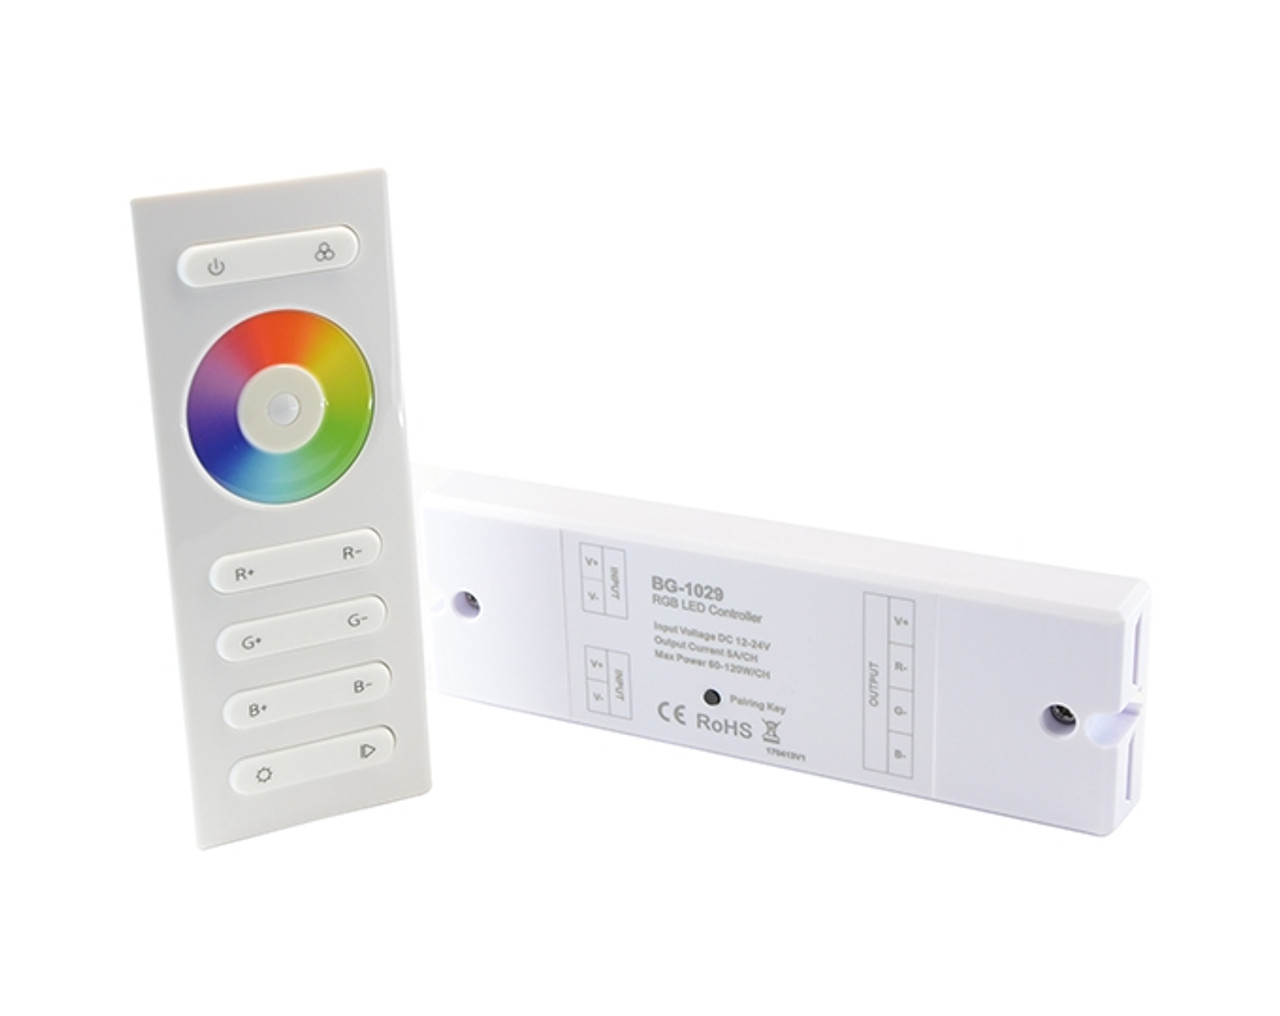 Chronisch alleen persoonlijkheid Remote Controller used to operate RGB LED Color Changing Lights. Compact  with precise user interface. High Quality LED light controller.